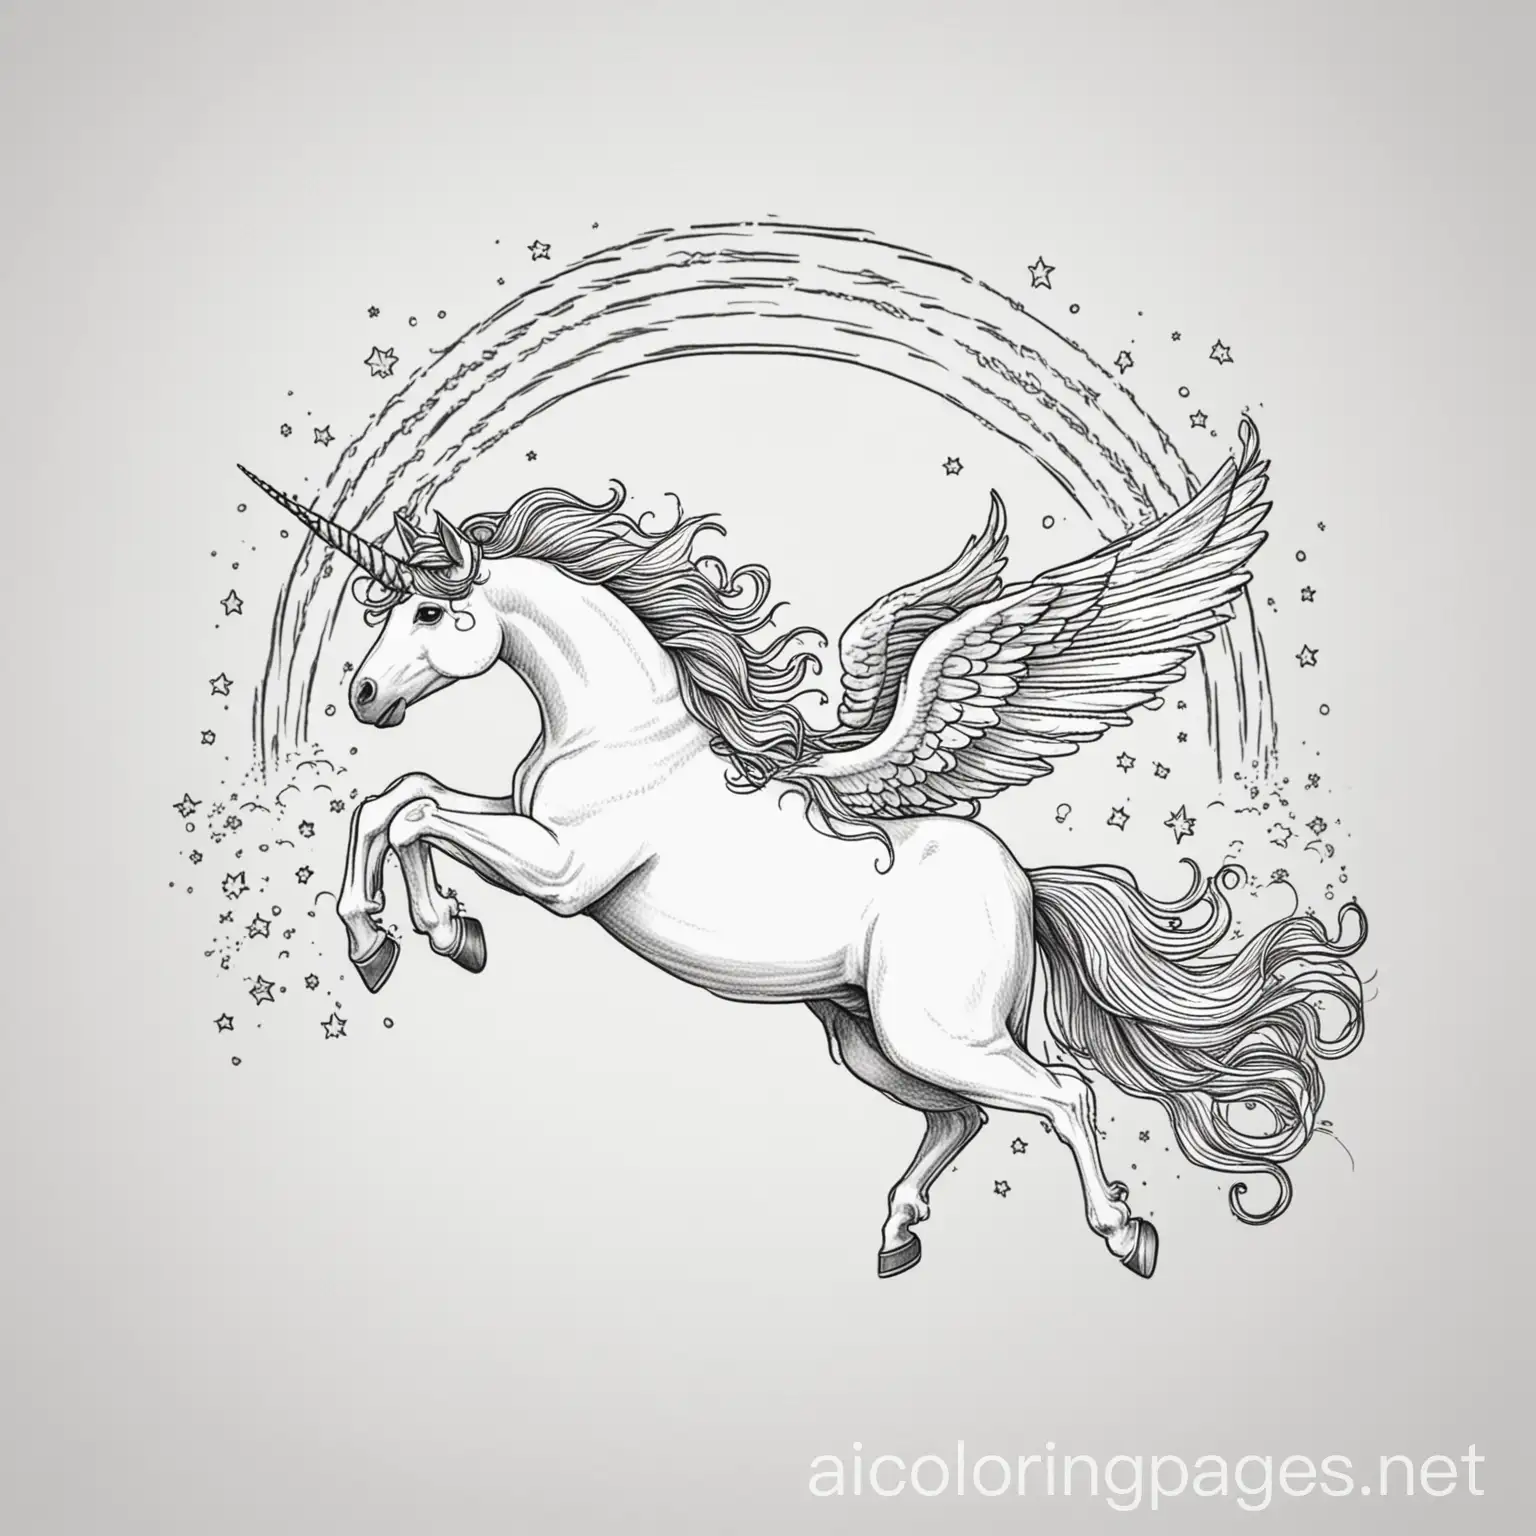 Flying-Unicorn-Coloring-Page-Whimsical-Line-Art-on-White-Background